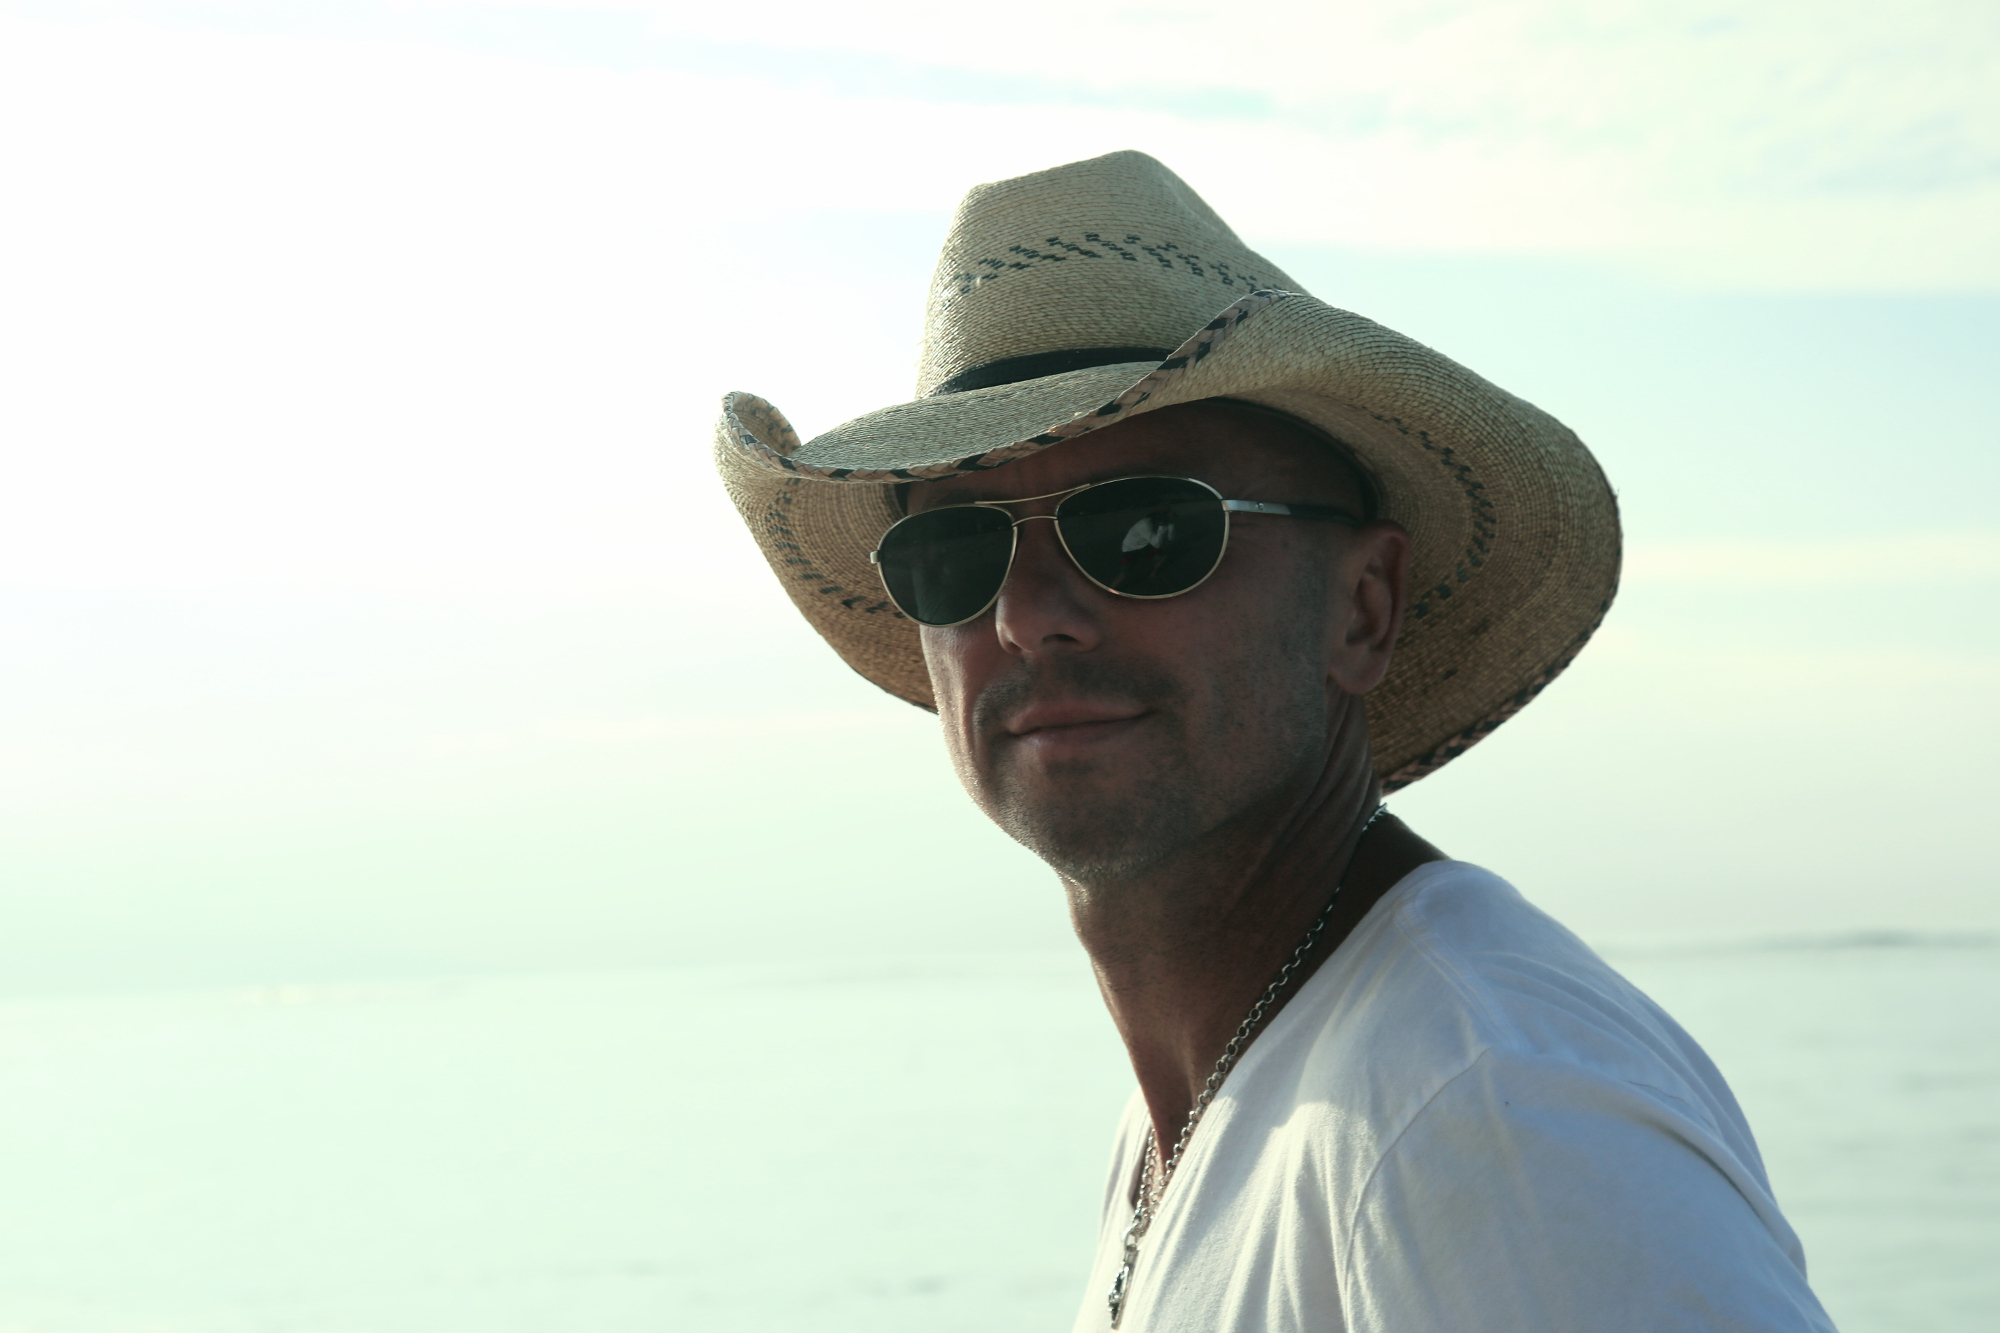 Kenny Chesney Is Both ‘Here and Now’ With Latest Album